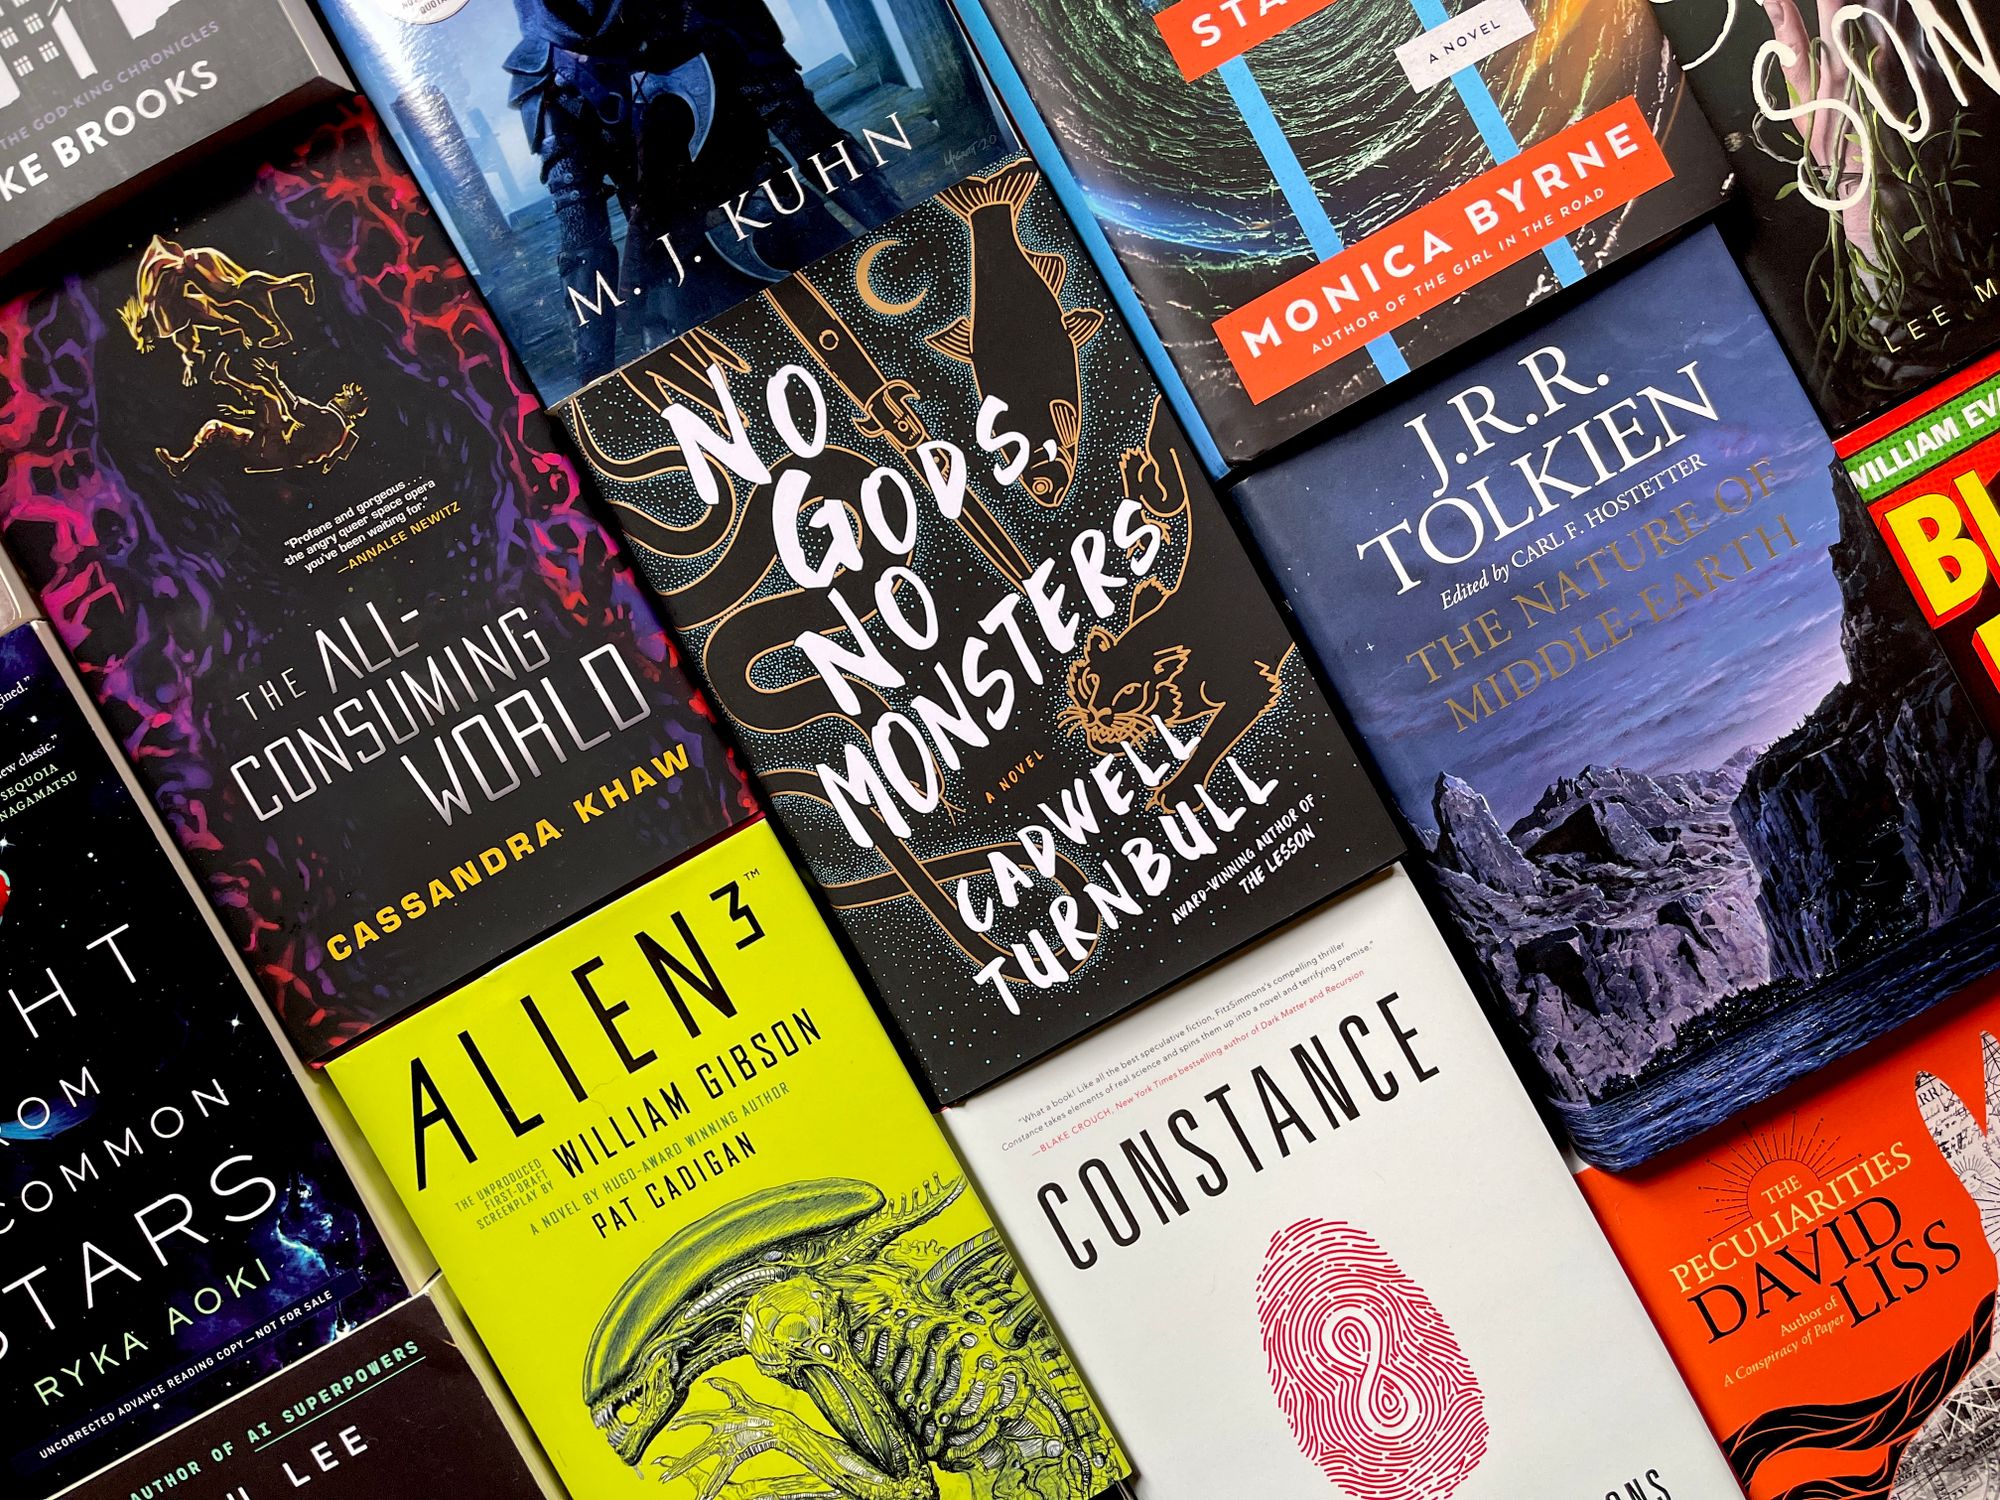 September is a packed month for SF/F (and other genre) books. There are stories of science fictional and fantastical heists, technological breakthroug